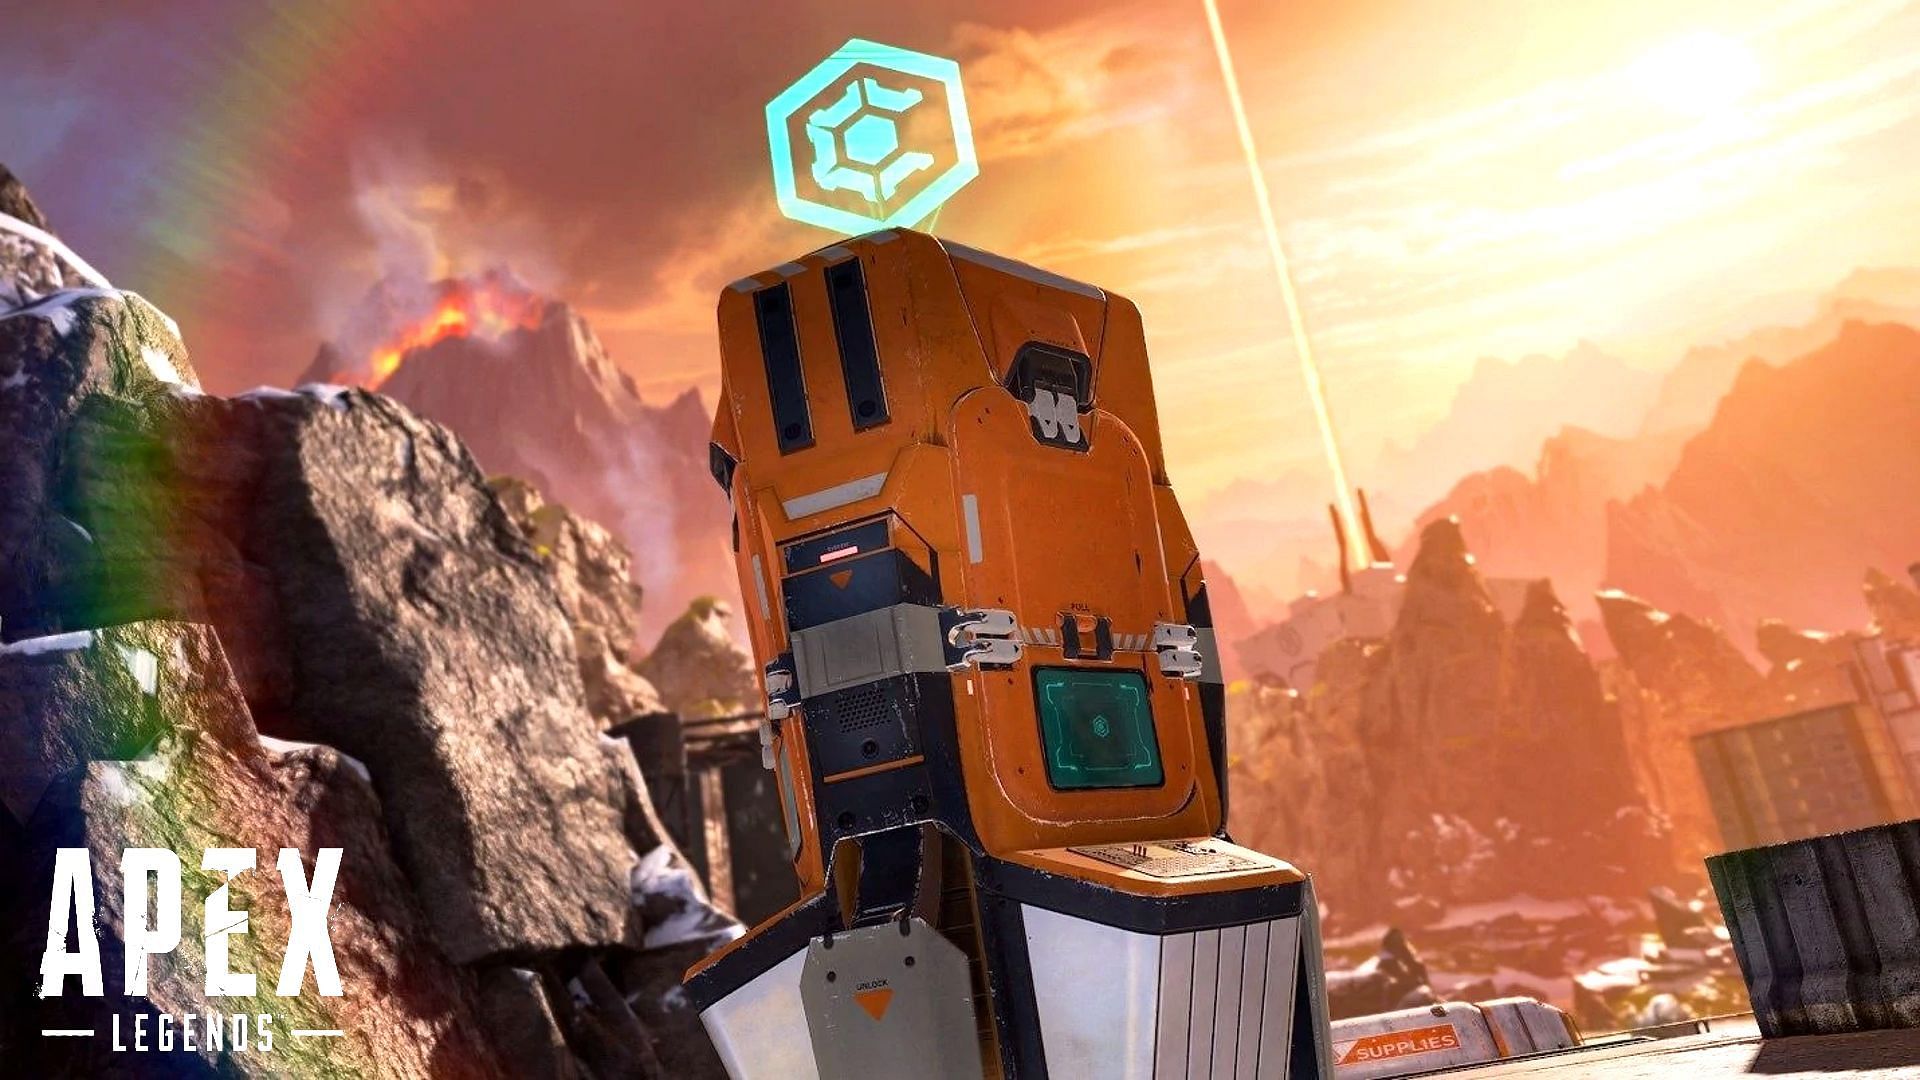 The latest update features new crafting rotation in Apex Legends (Image via EA)